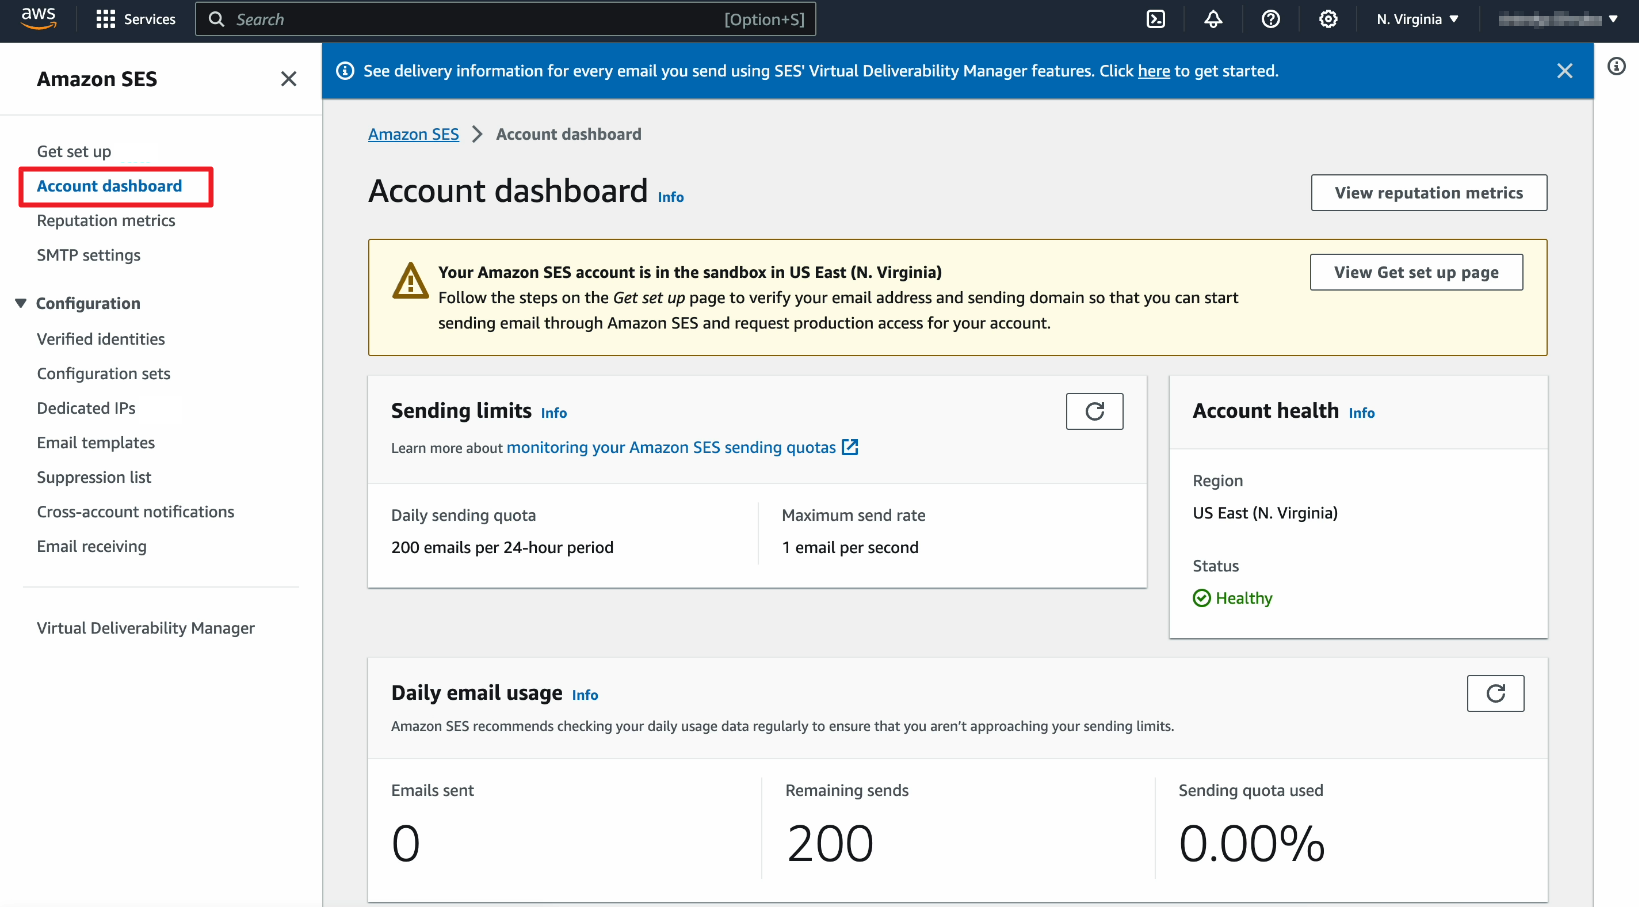 Clicking on Account dashboard